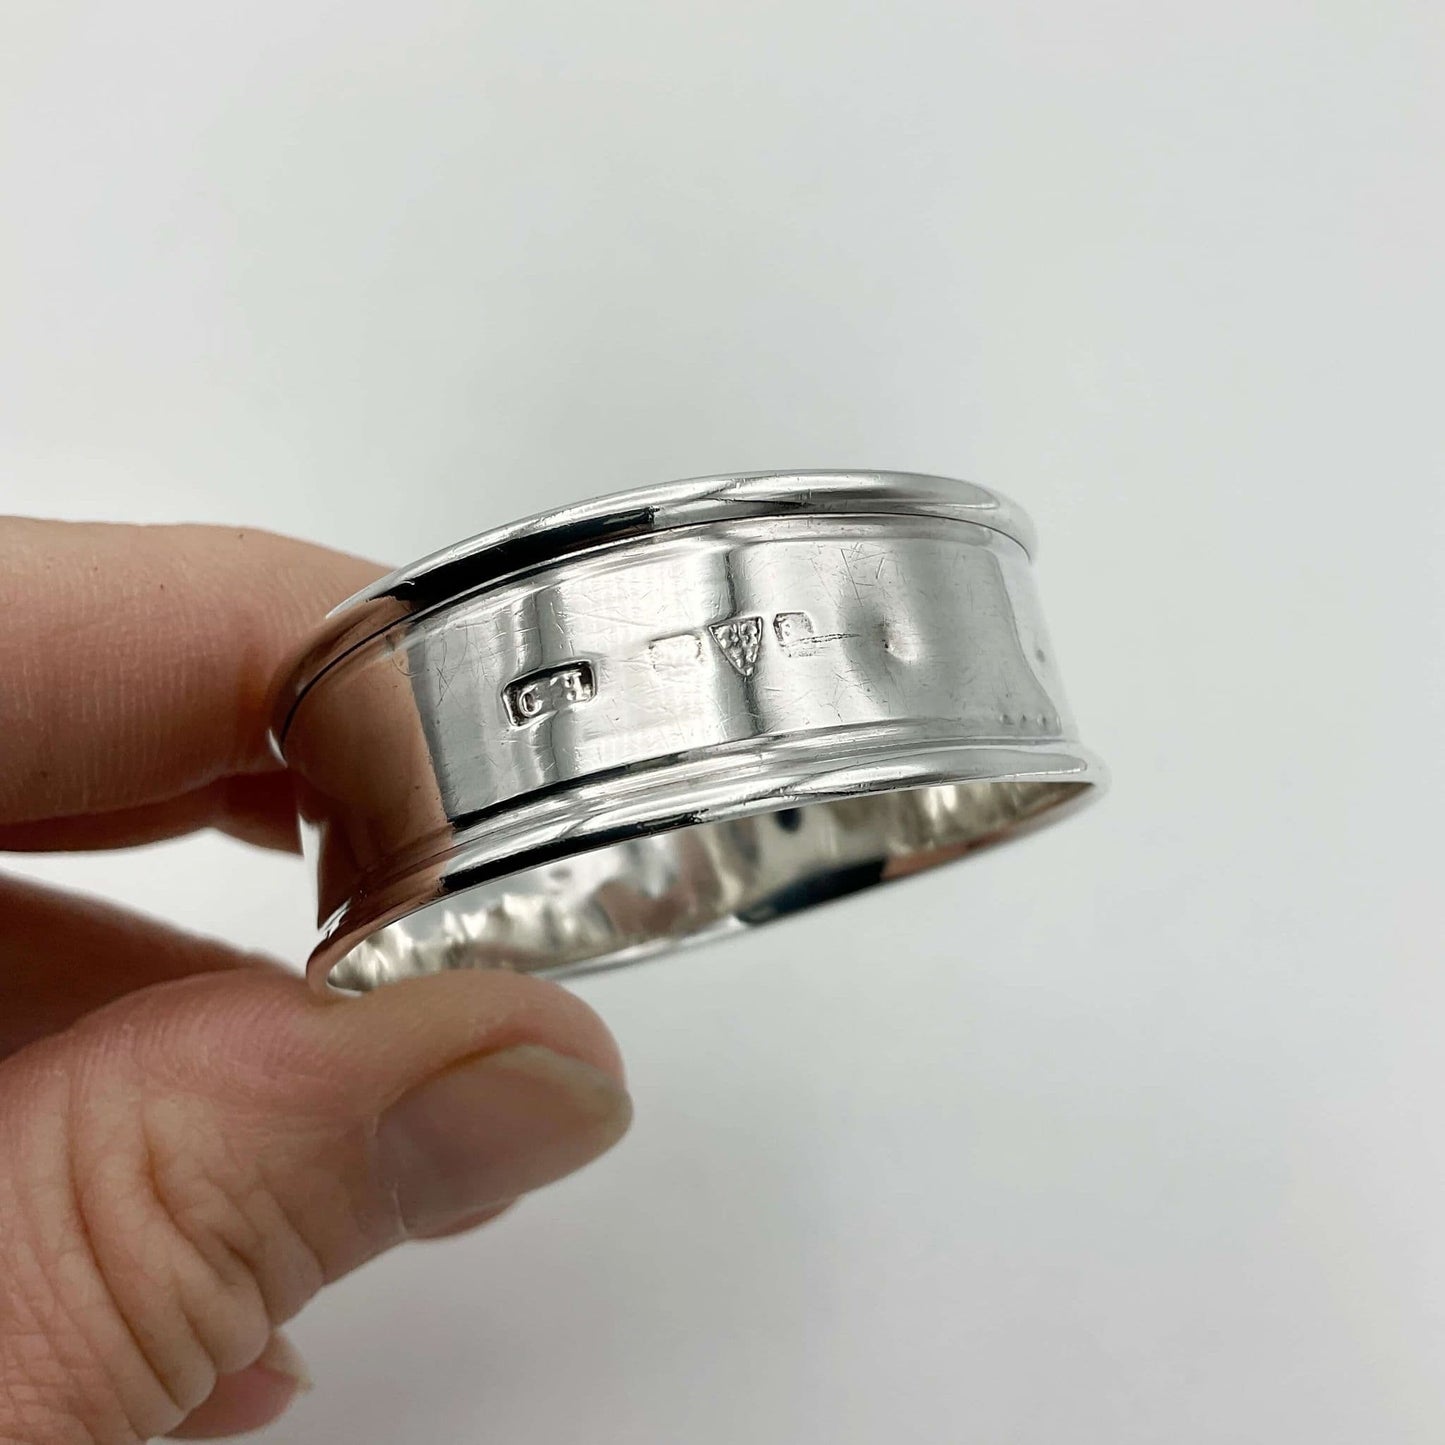 Antique 1905 Sterling Silver Napkin Ring